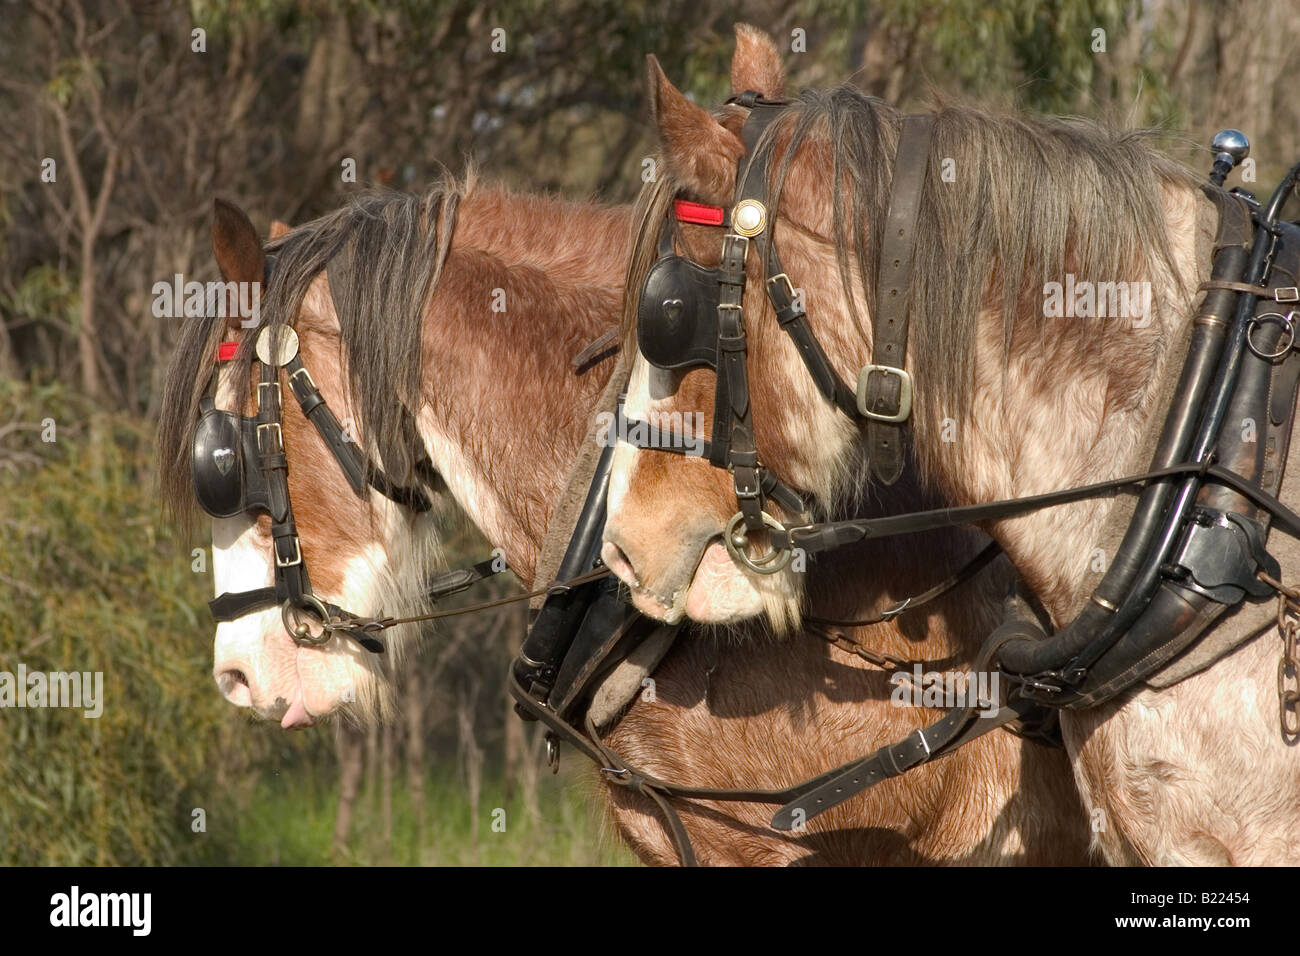 Clydesdale horse heads with blinkers on Stock Photo